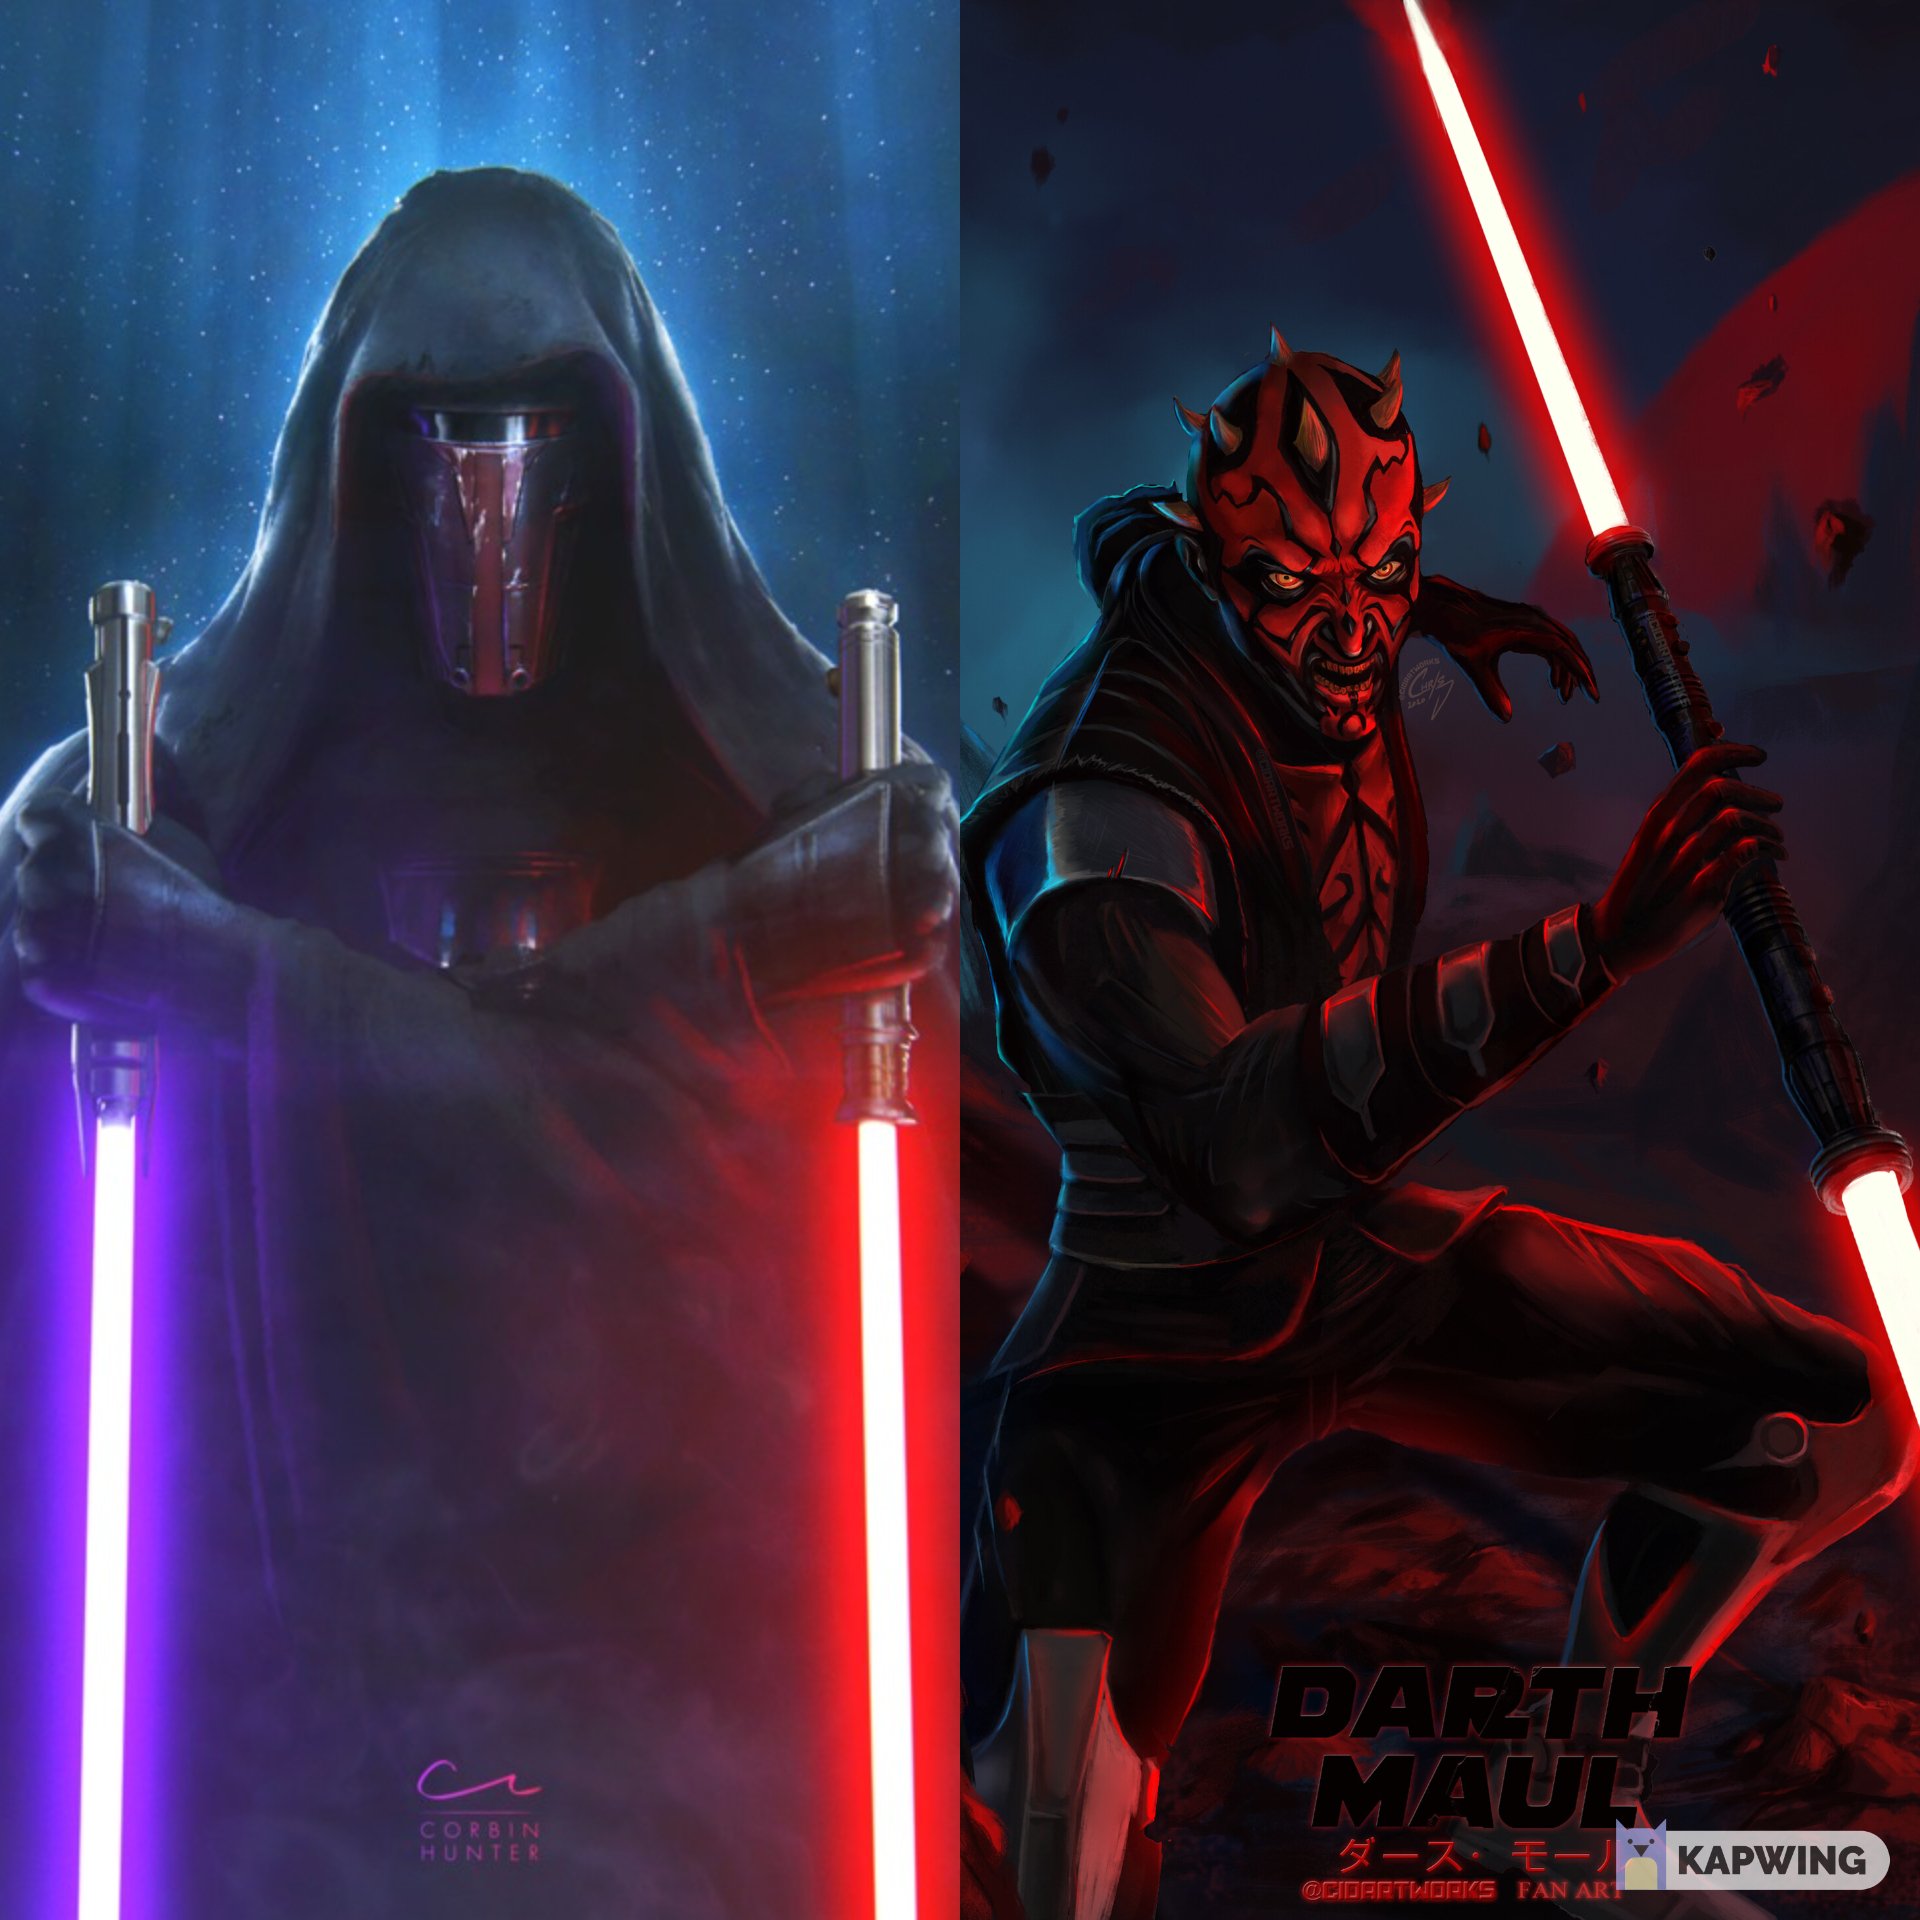 Suited Darth Vader and Starkiller vs Revan and Maul (Legends)